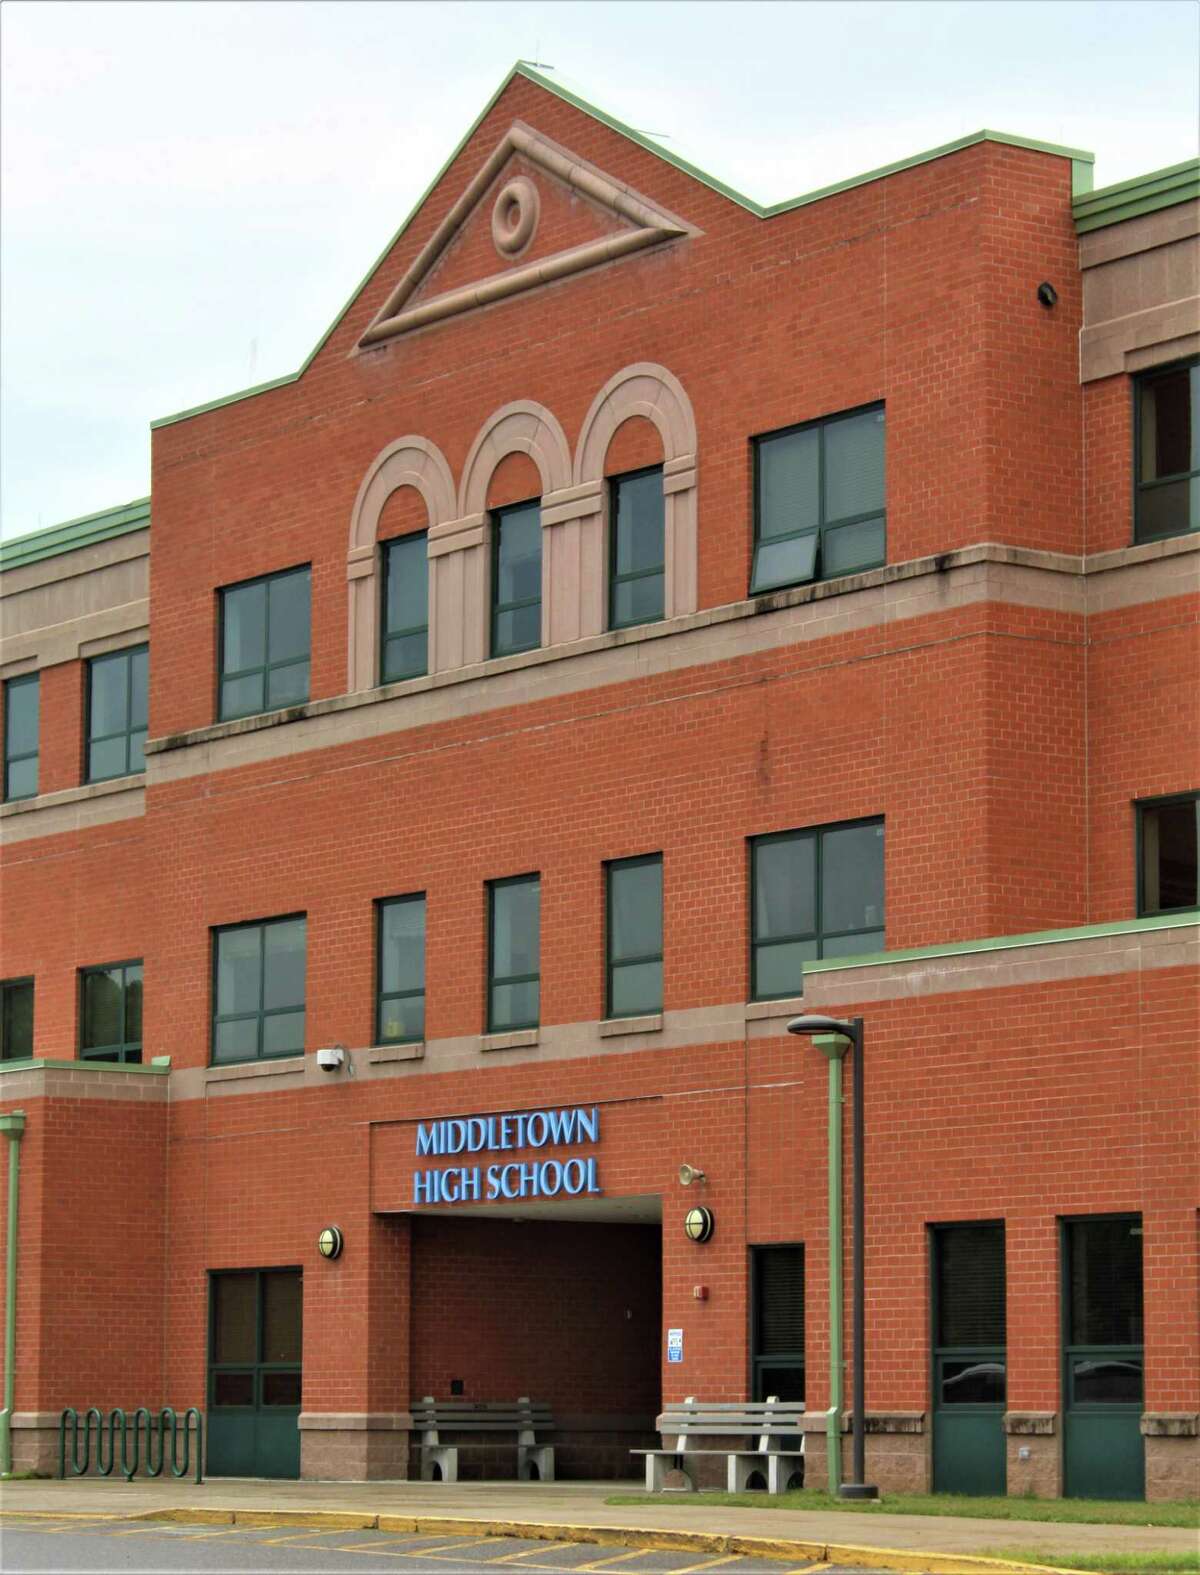 Middletown High School is located at 200 La Rosa Lane.